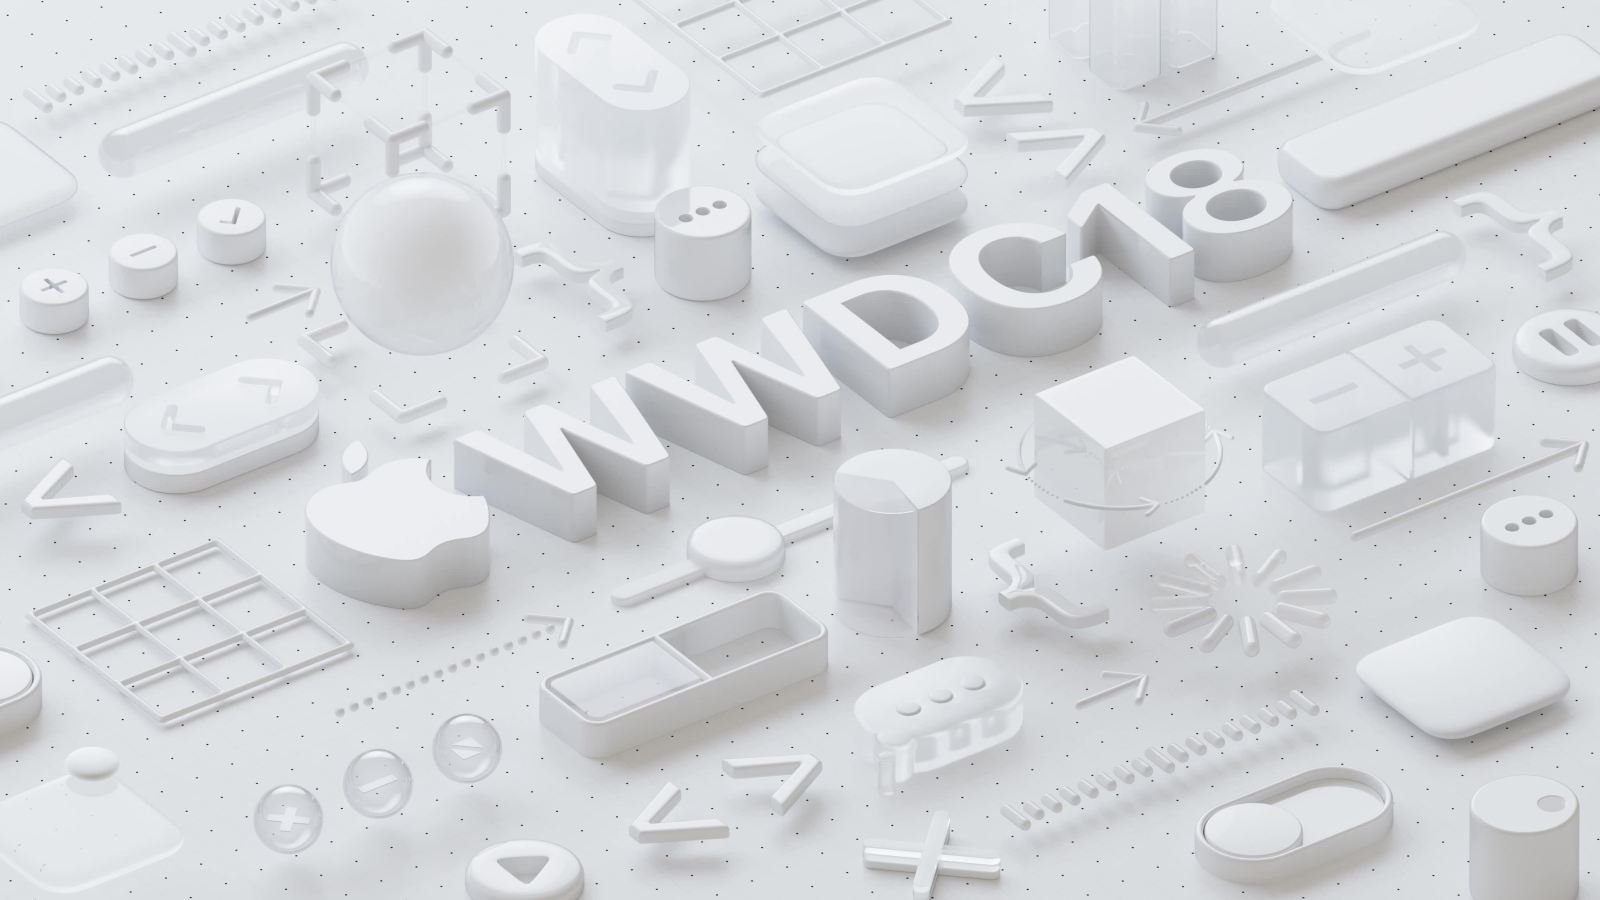 What to expect at apple’s wwdc 2018